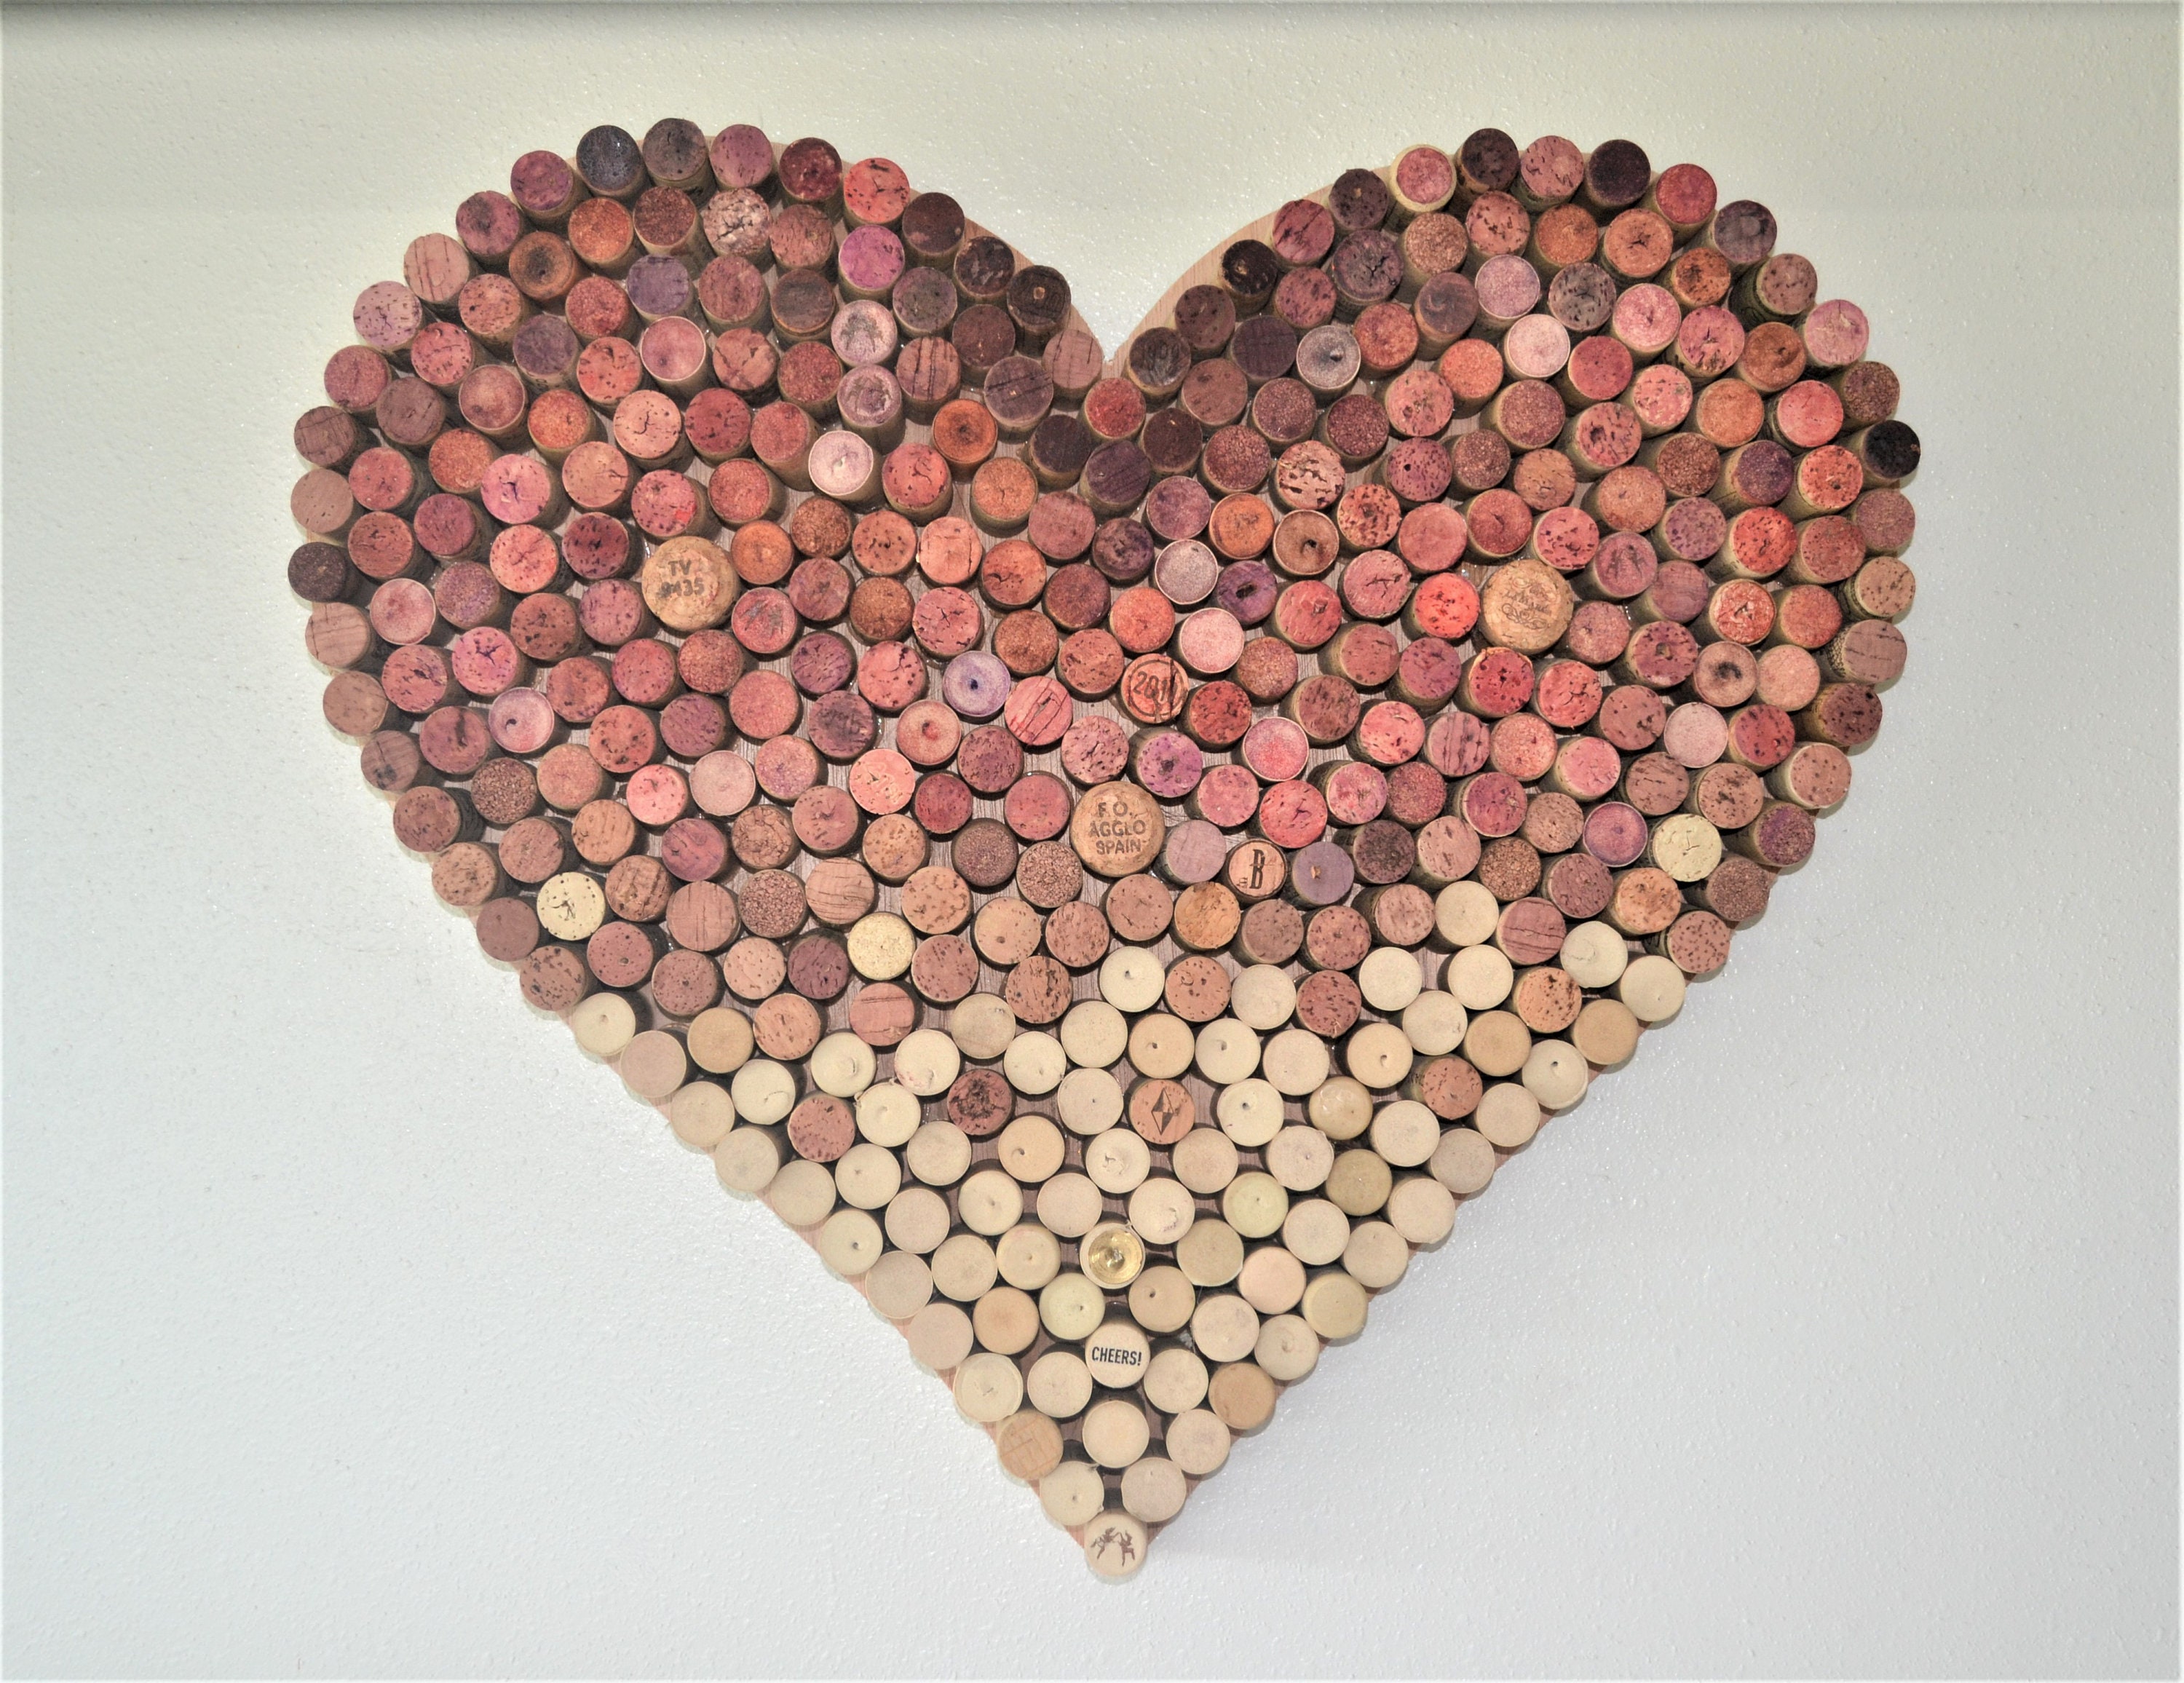 84 Pieces NATURAL Red/White Used Wine Corks for Crafts Art Material